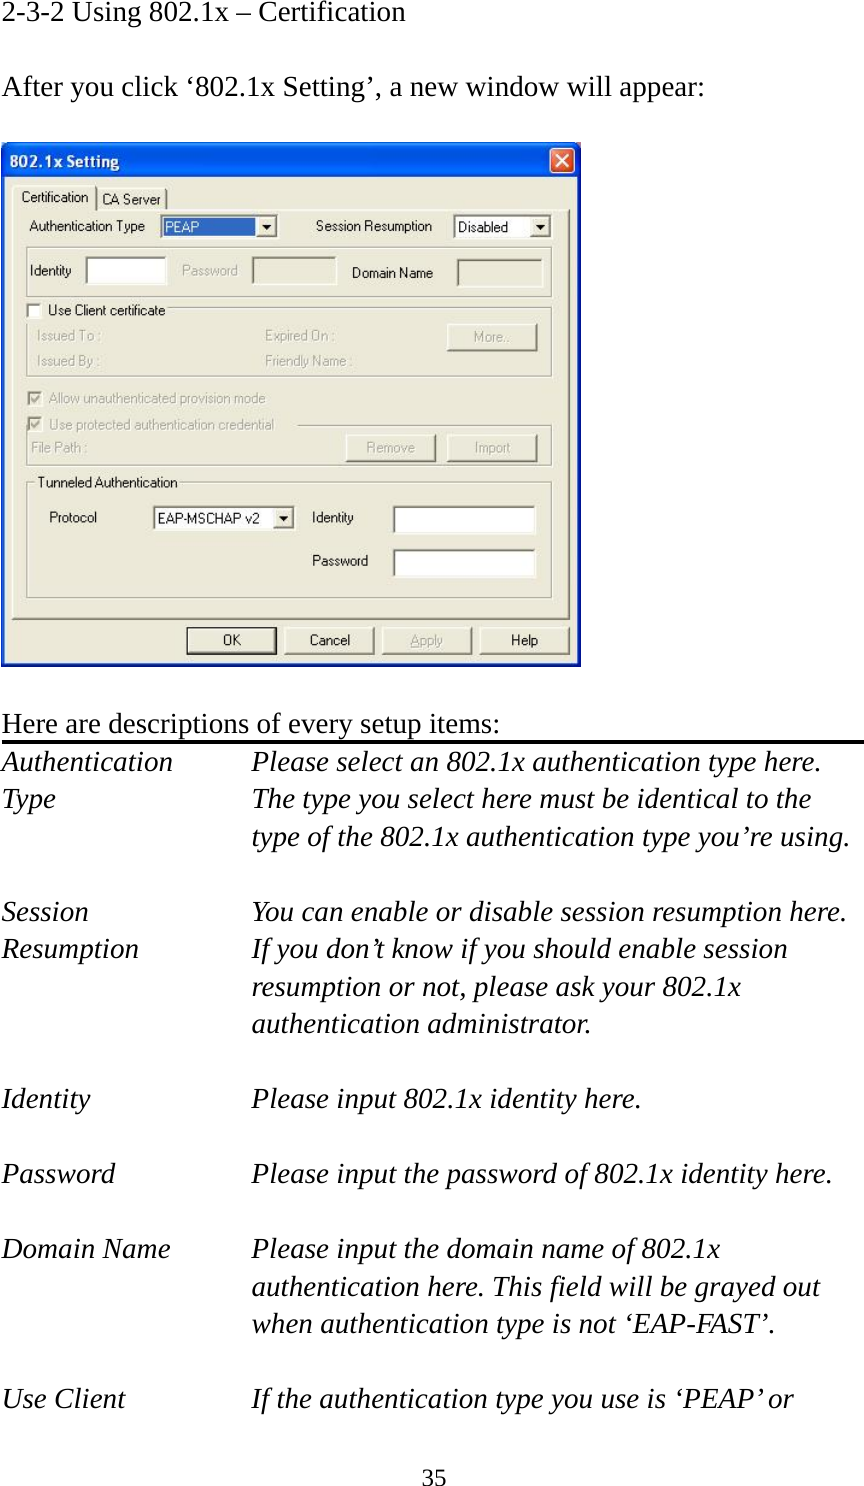  352-3-2 Using 802.1x – Certification  After you click ‘802.1x Setting’, a new window will appear:    Here are descriptions of every setup items: Authentication    Please select an 802.1x authentication type here. Type        The type you select here must be identical to the type of the 802.1x authentication type you’re using.  Session        You can enable or disable session resumption here. Resumption  If you don’t know if you should enable session resumption or not, please ask your 802.1x authentication administrator.  Identity  Please input 802.1x identity here.  Password  Please input the password of 802.1x identity here.  Domain Name  Please input the domain name of 802.1x authentication here. This field will be grayed out when authentication type is not ‘EAP-FAST’.  Use Client  If the authentication type you use is ‘PEAP’ or 